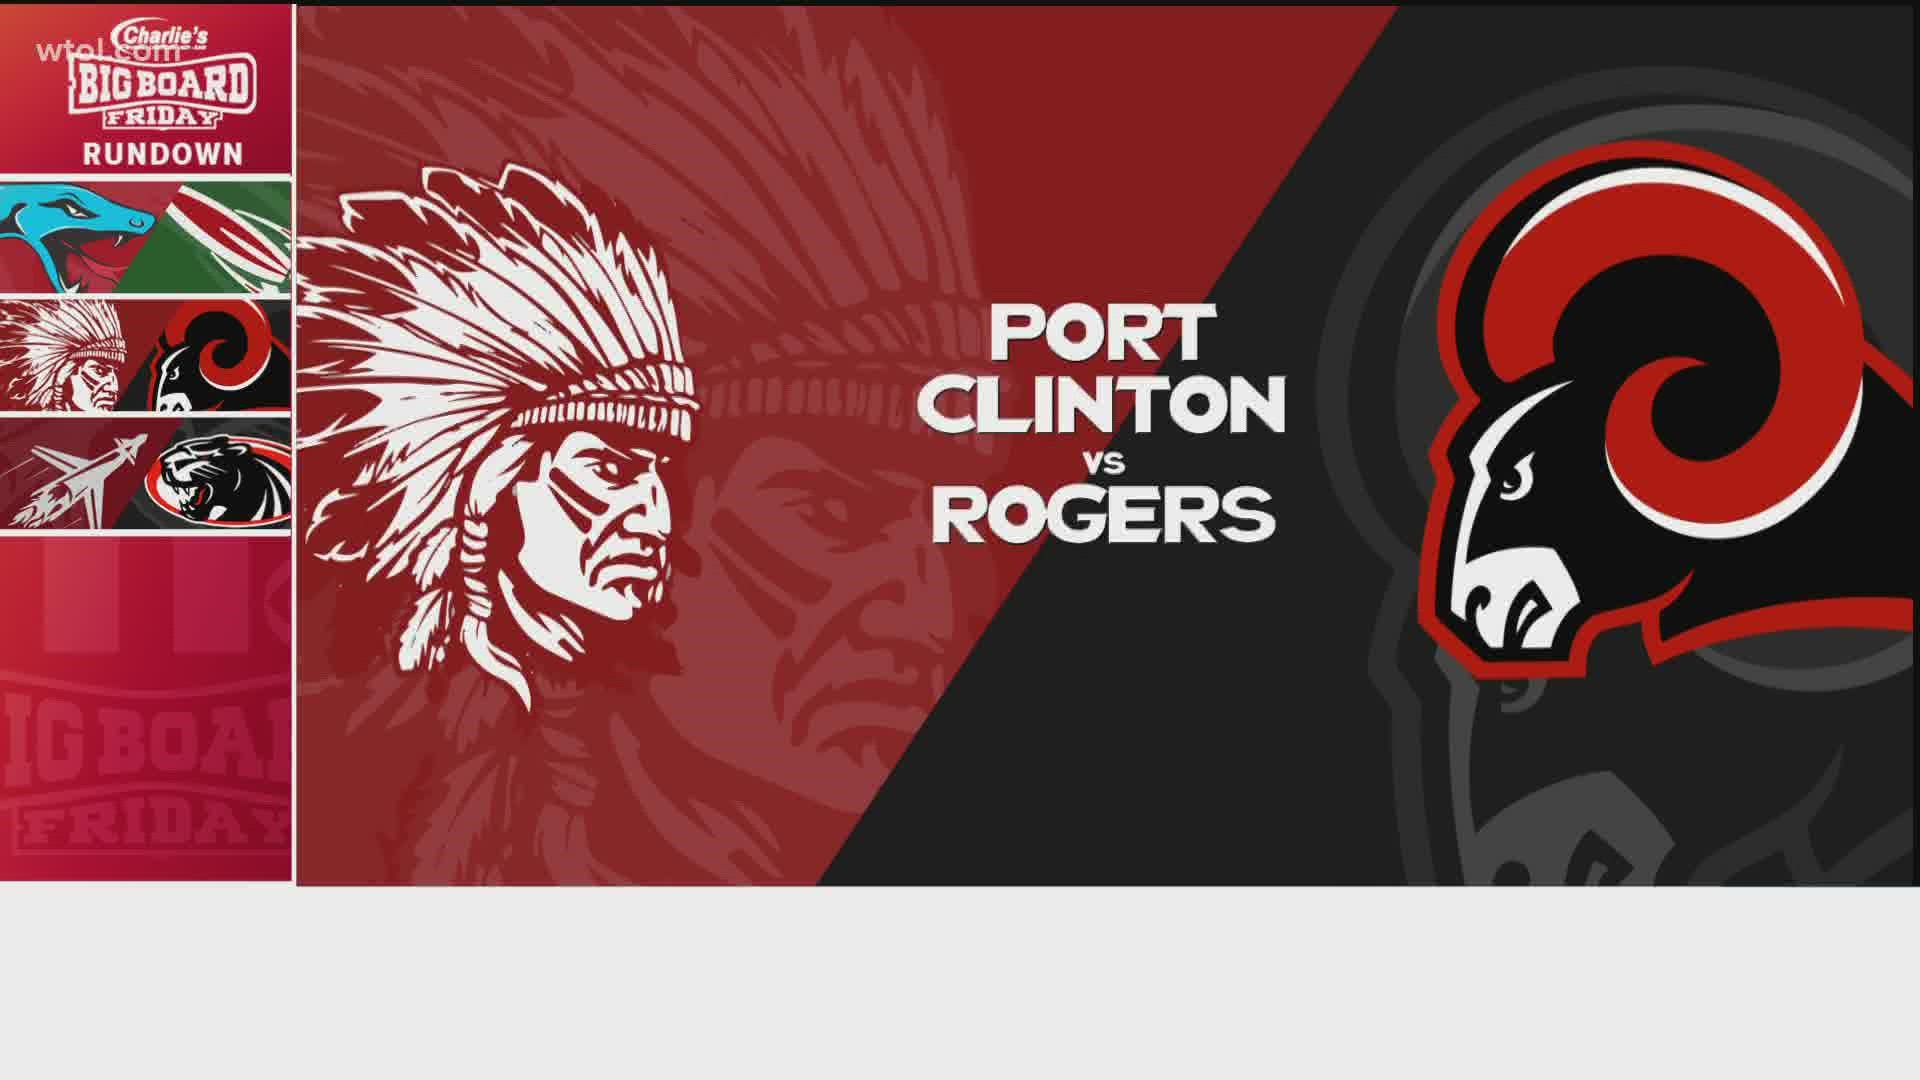 Rams welcome Redskins, but PC rolls over Rogers.